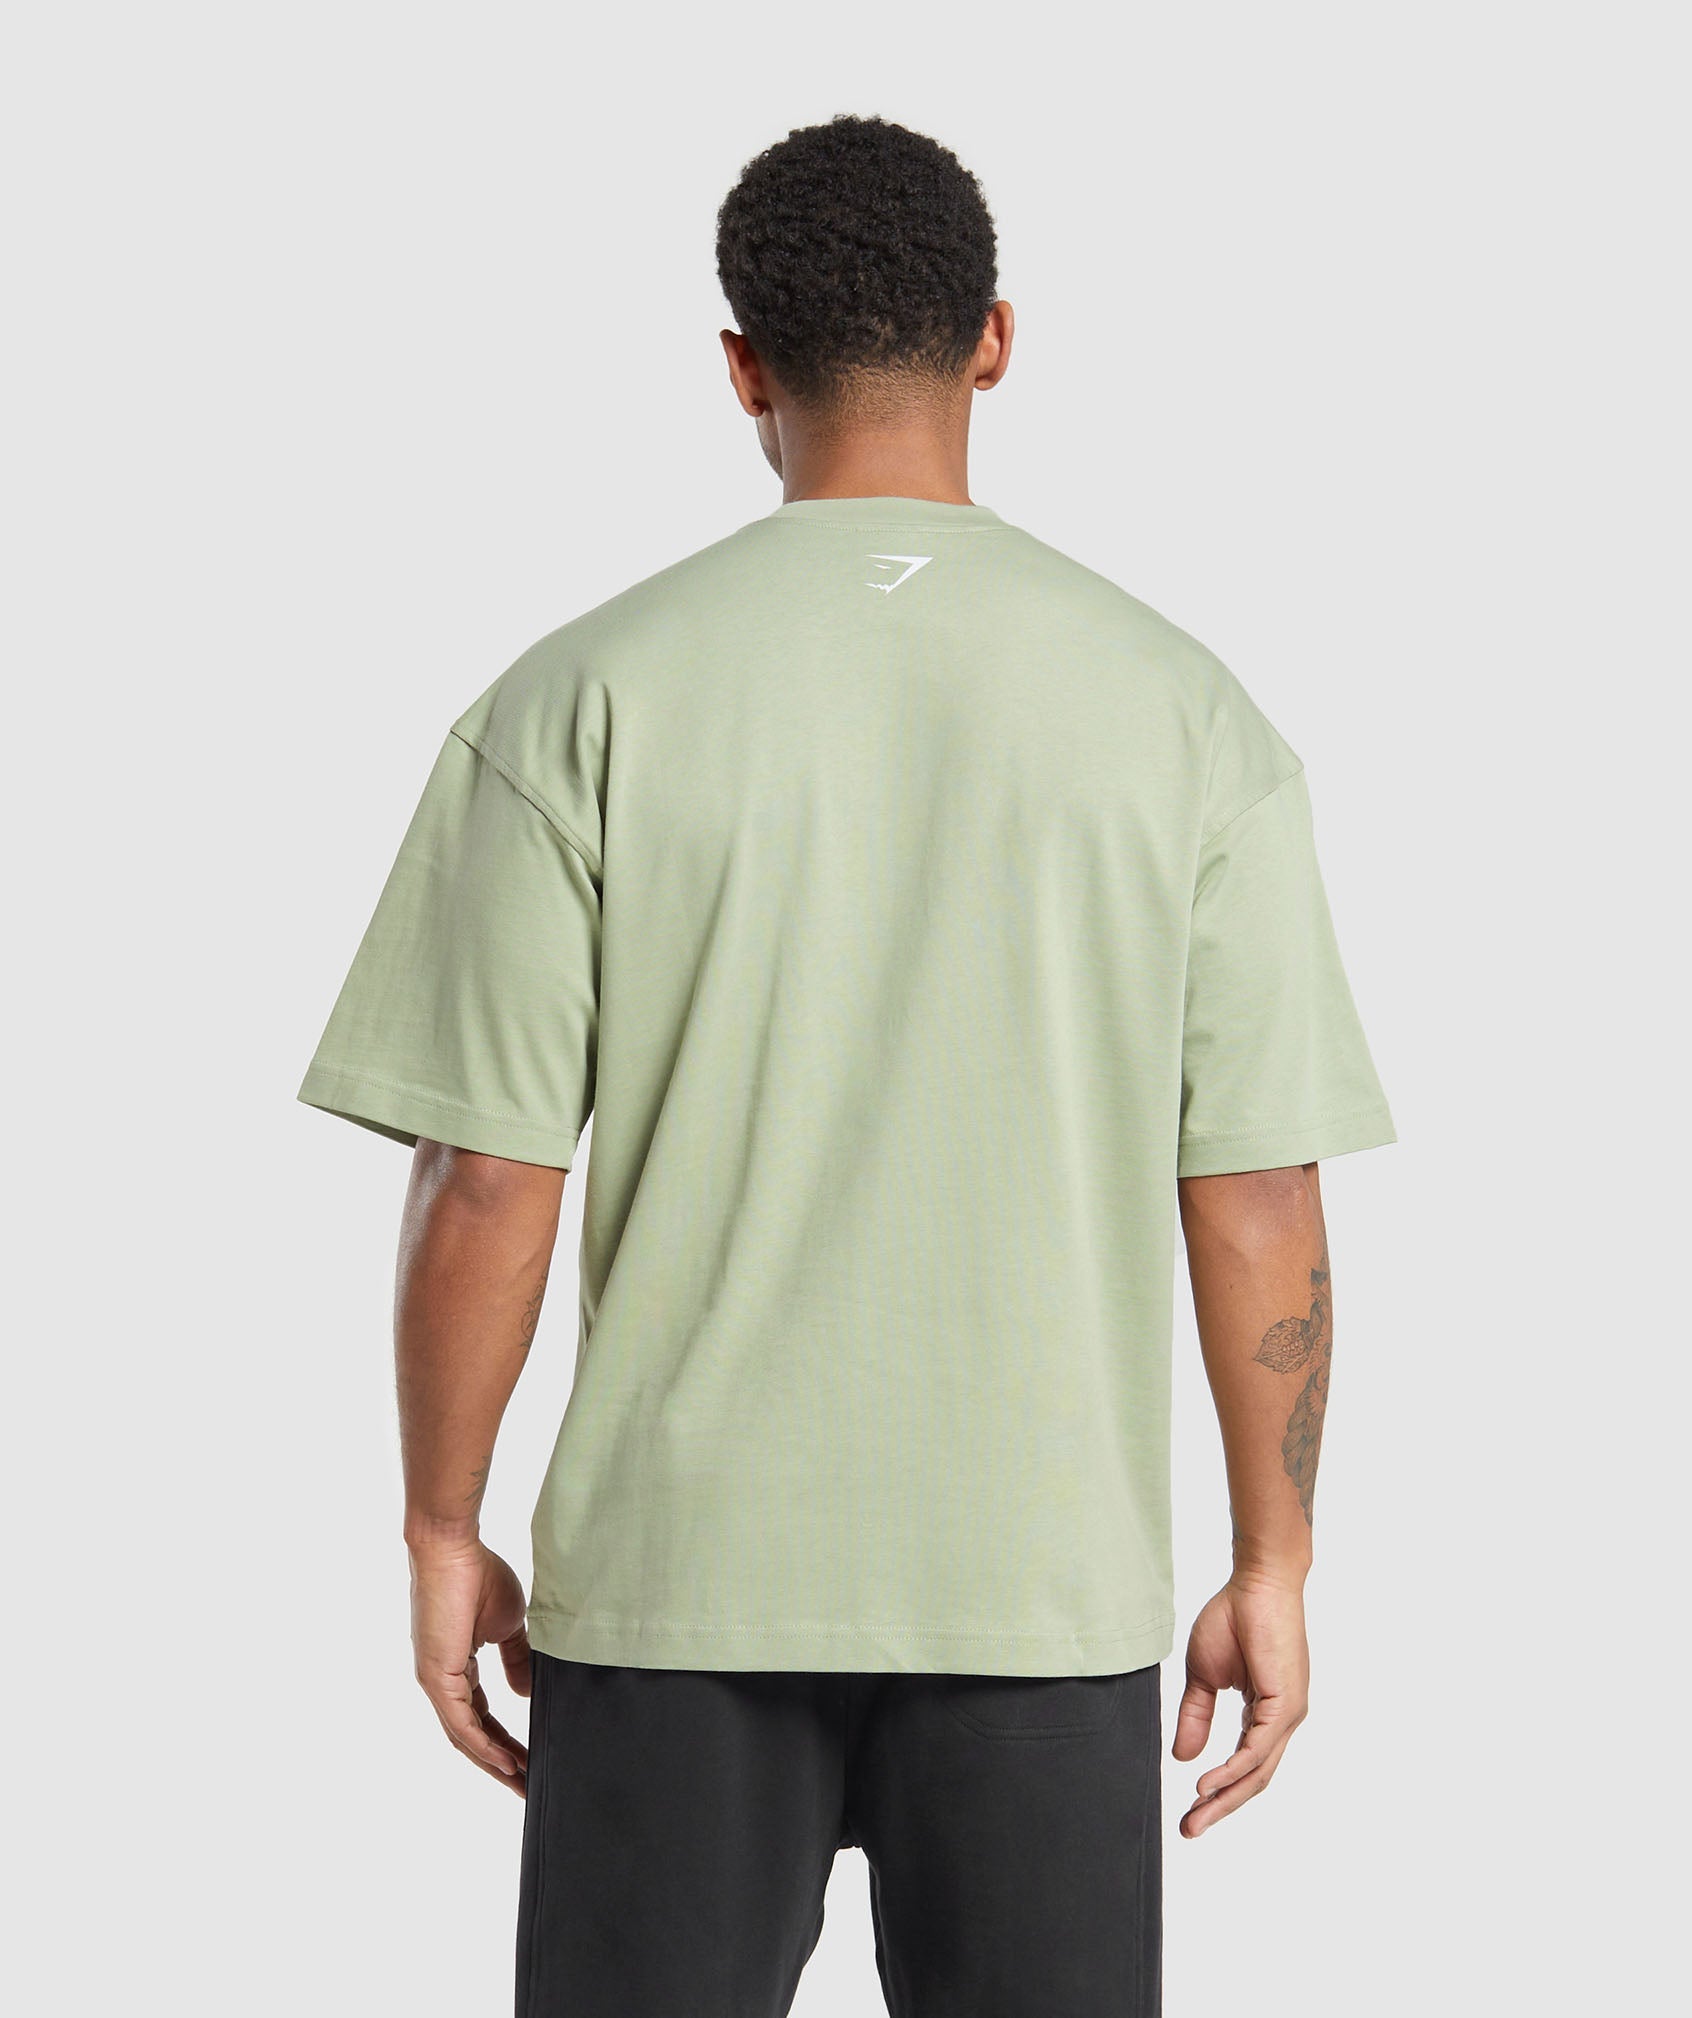 Collegiate T-Shirt in Faded Green - view 2